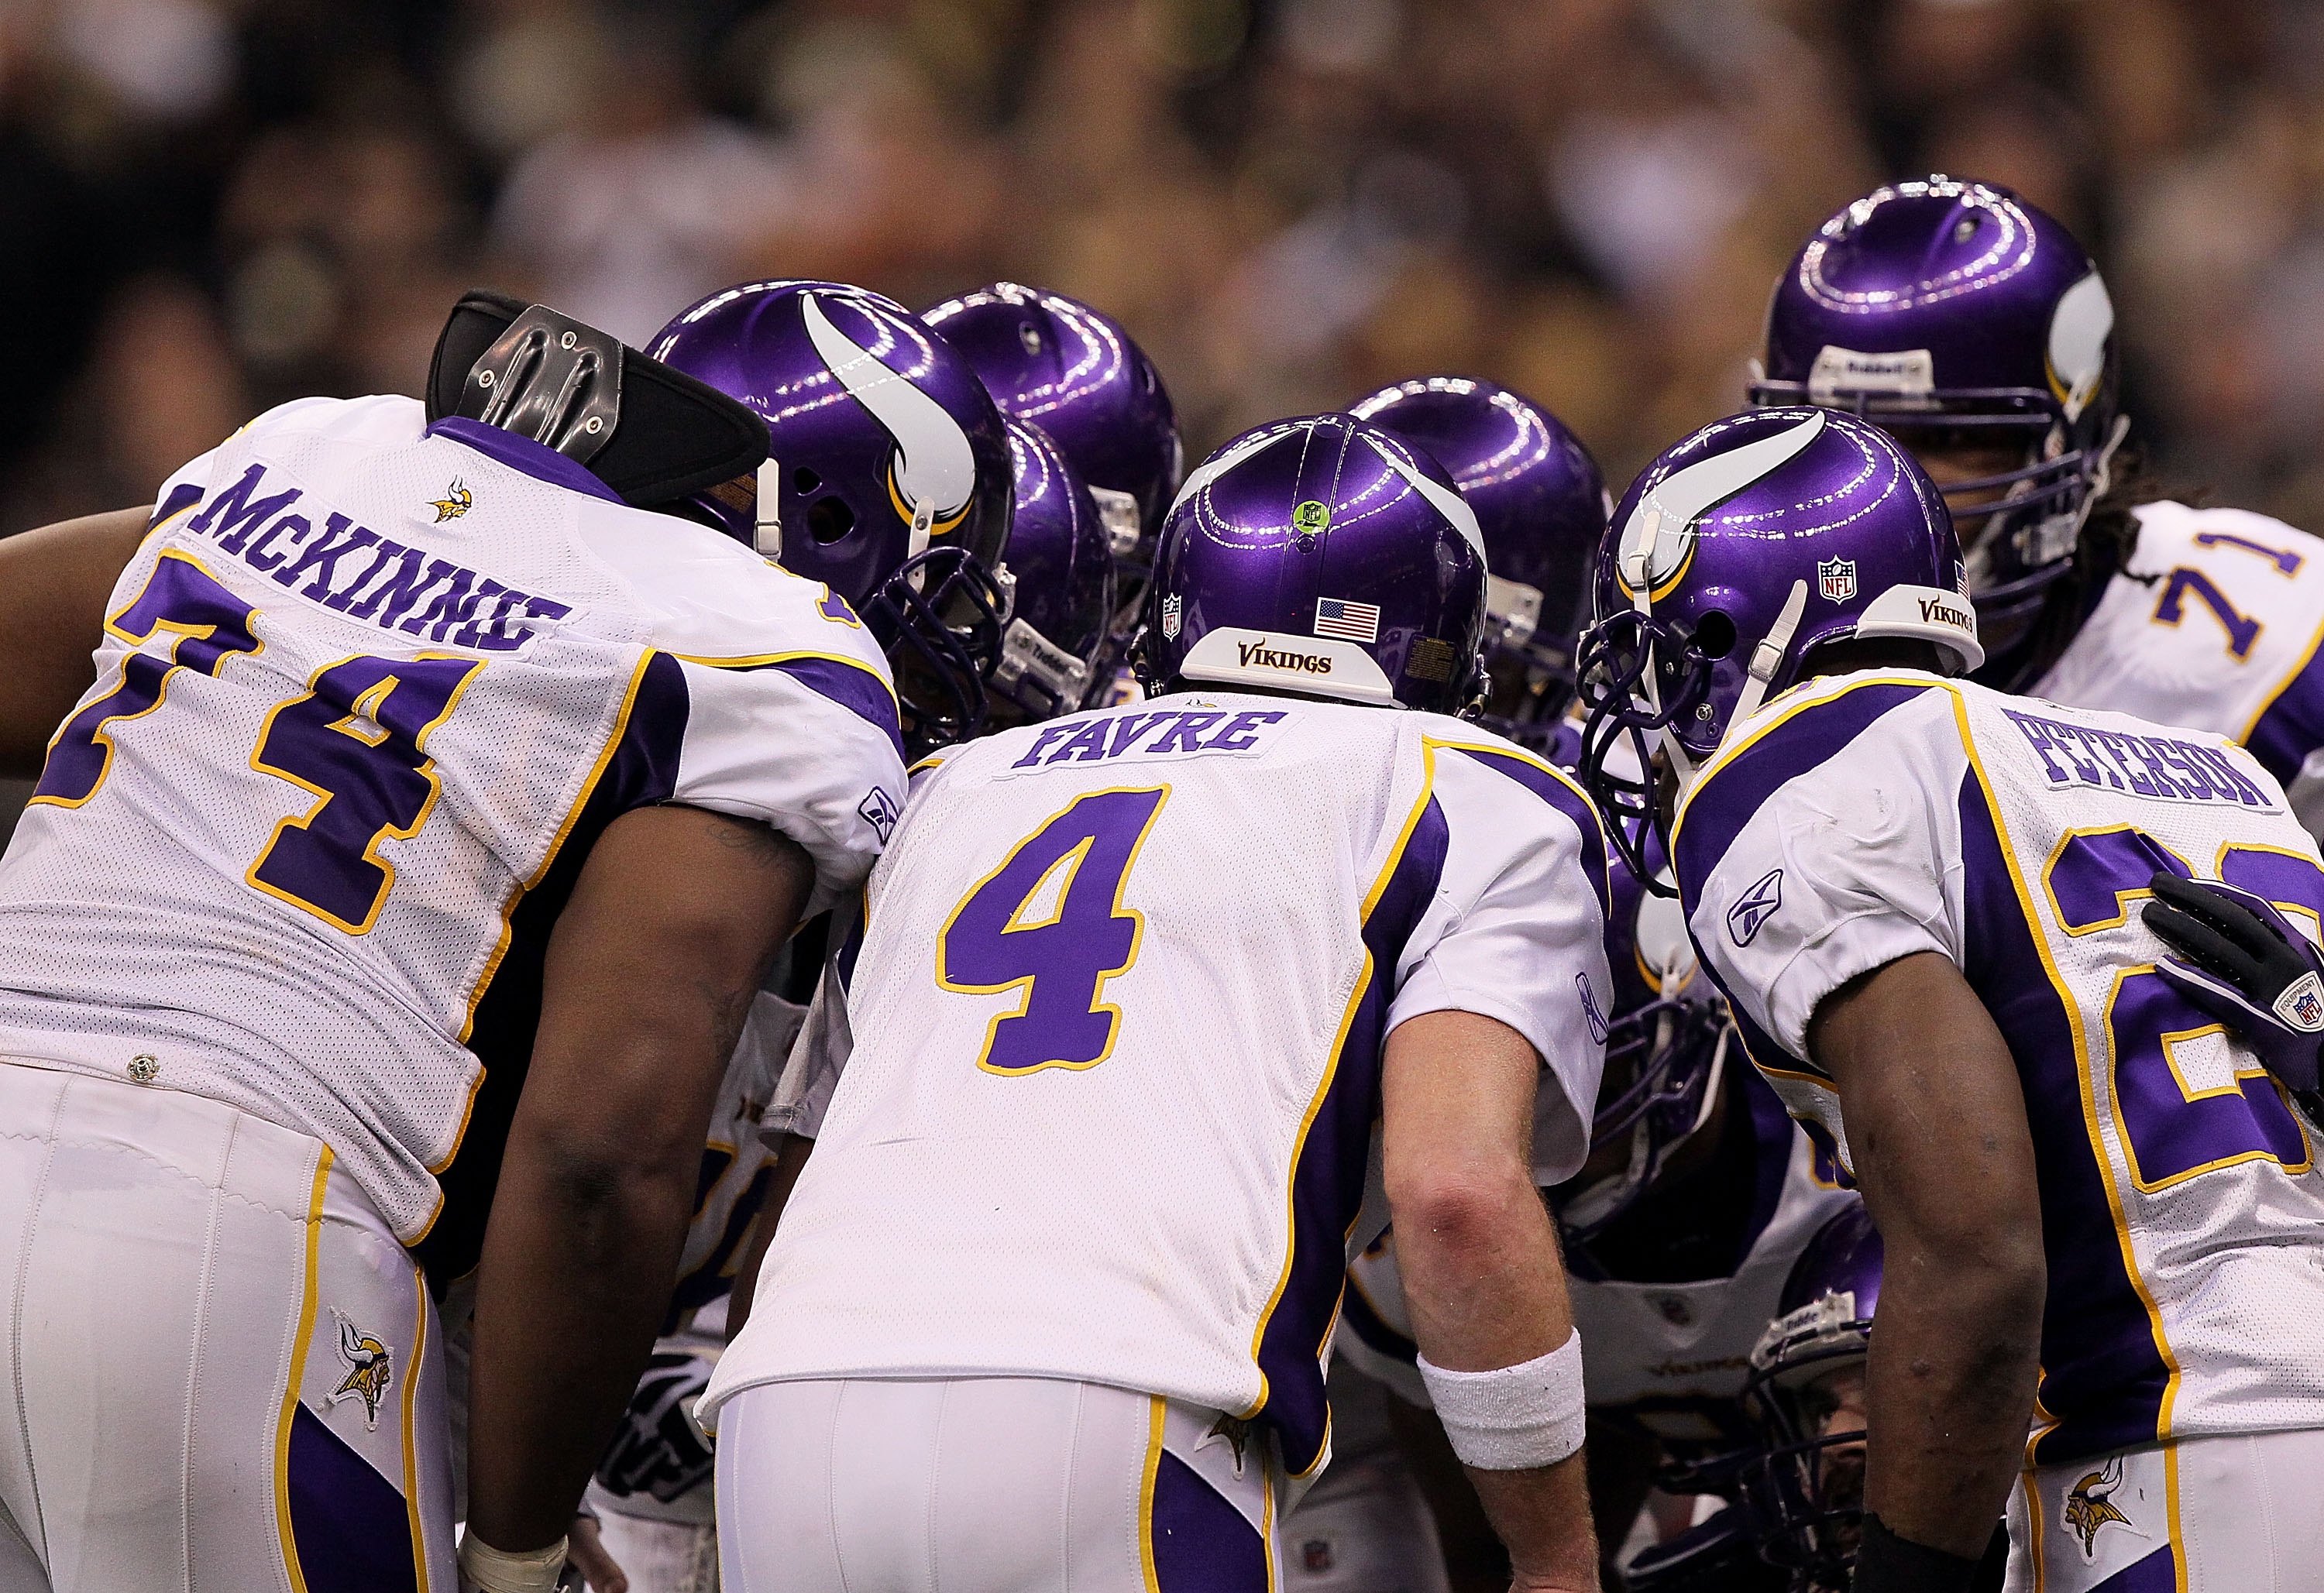 NFC North Preview: Are the Vikes Still the Team to Beat?